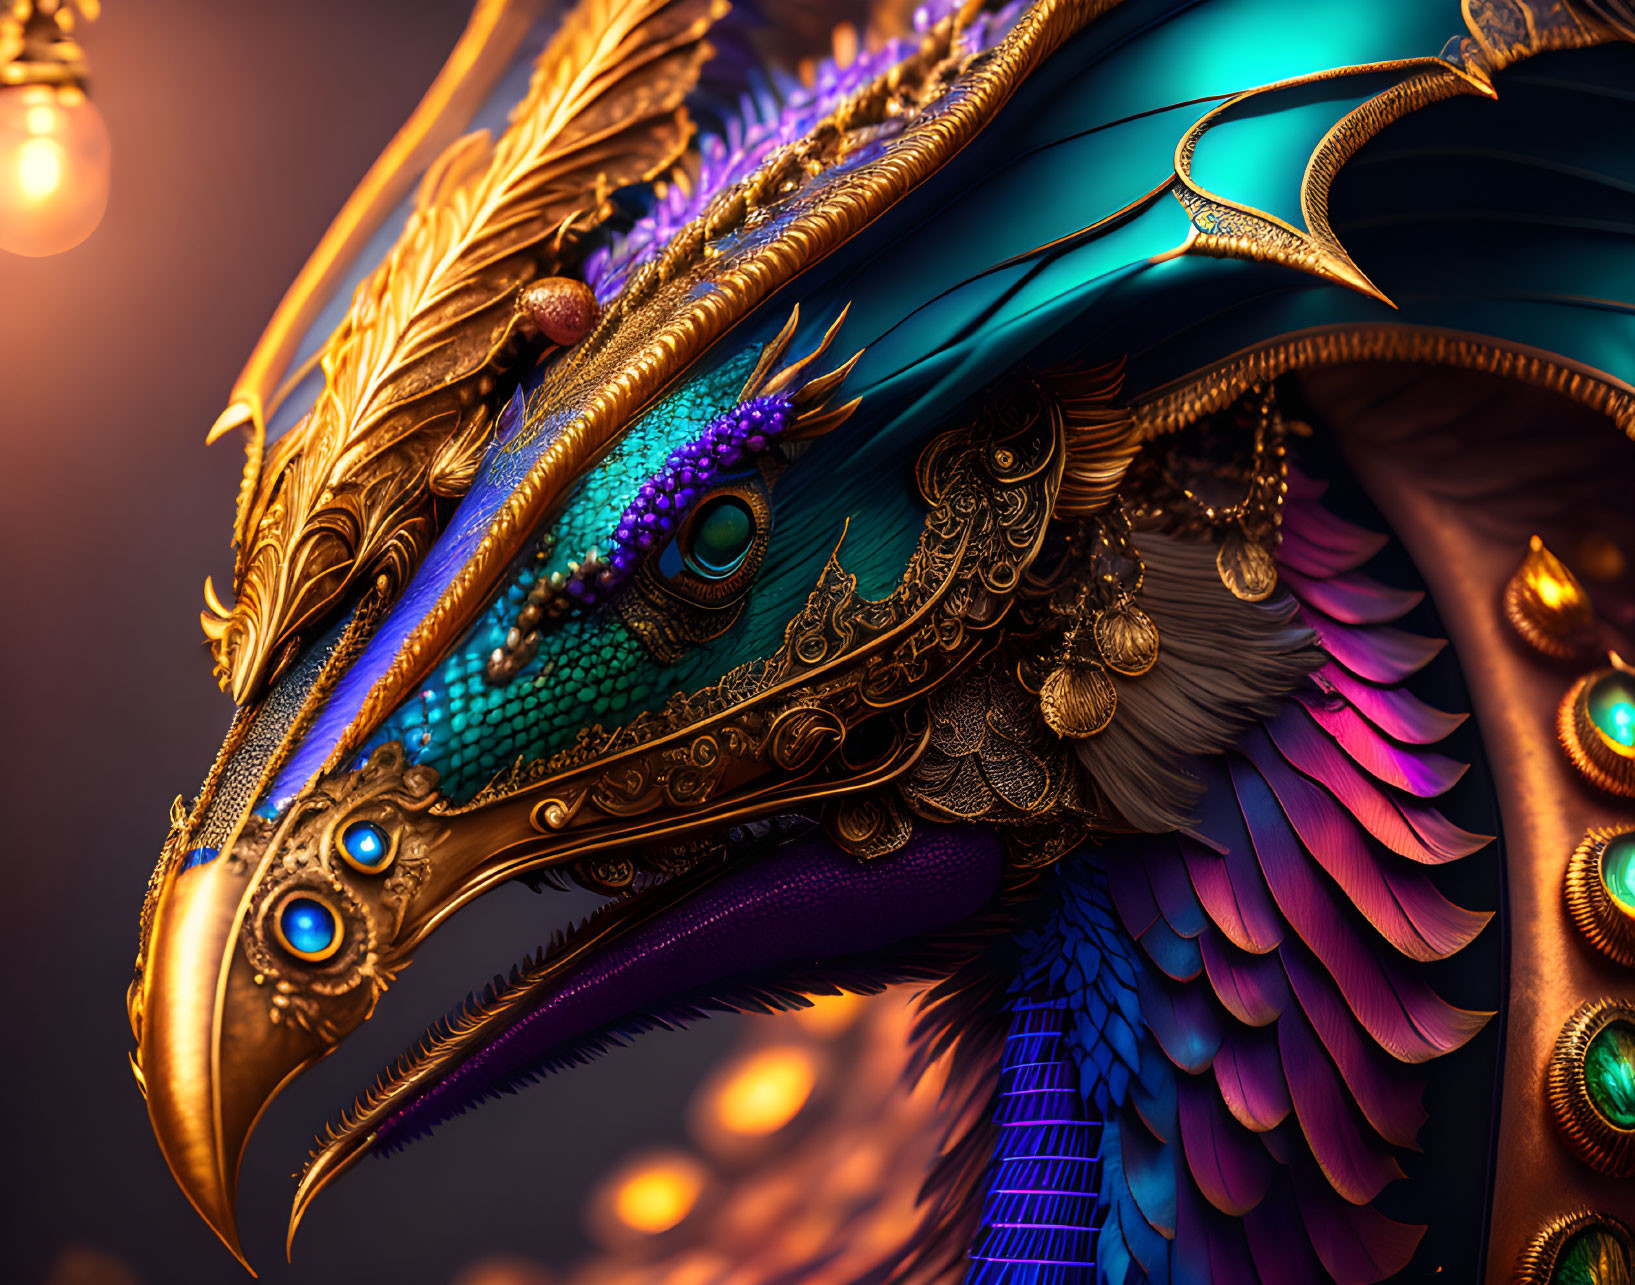 Detailed artistic rendering of a majestic, fantastical bird with vibrant peacock-like feathers and golden ornamentation